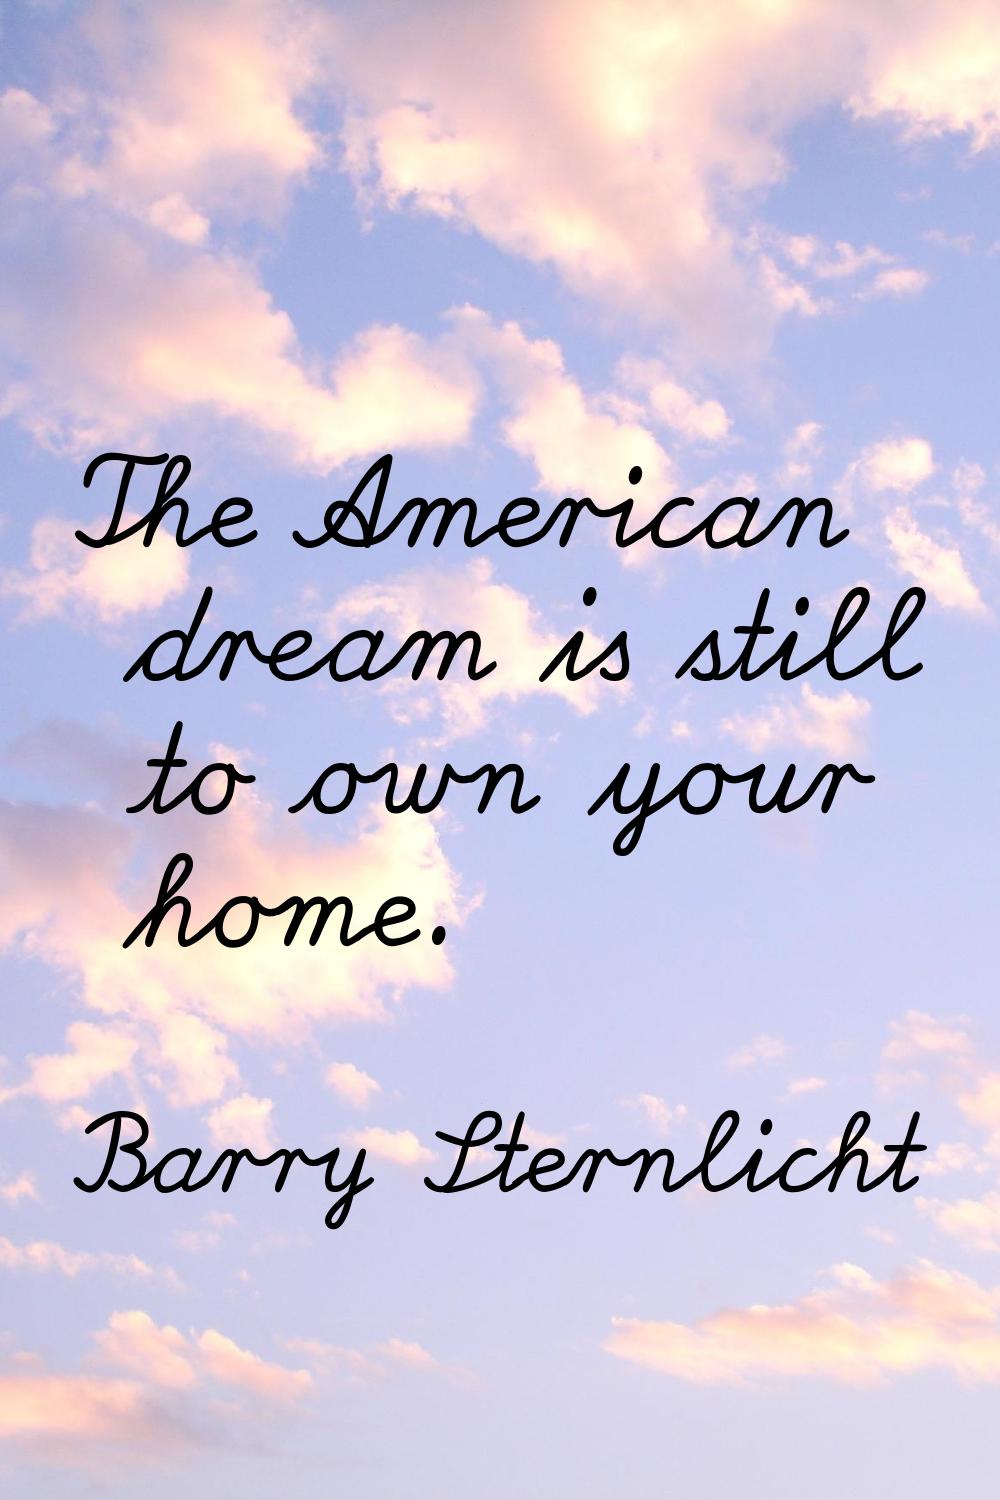 The American dream is still to own your home.